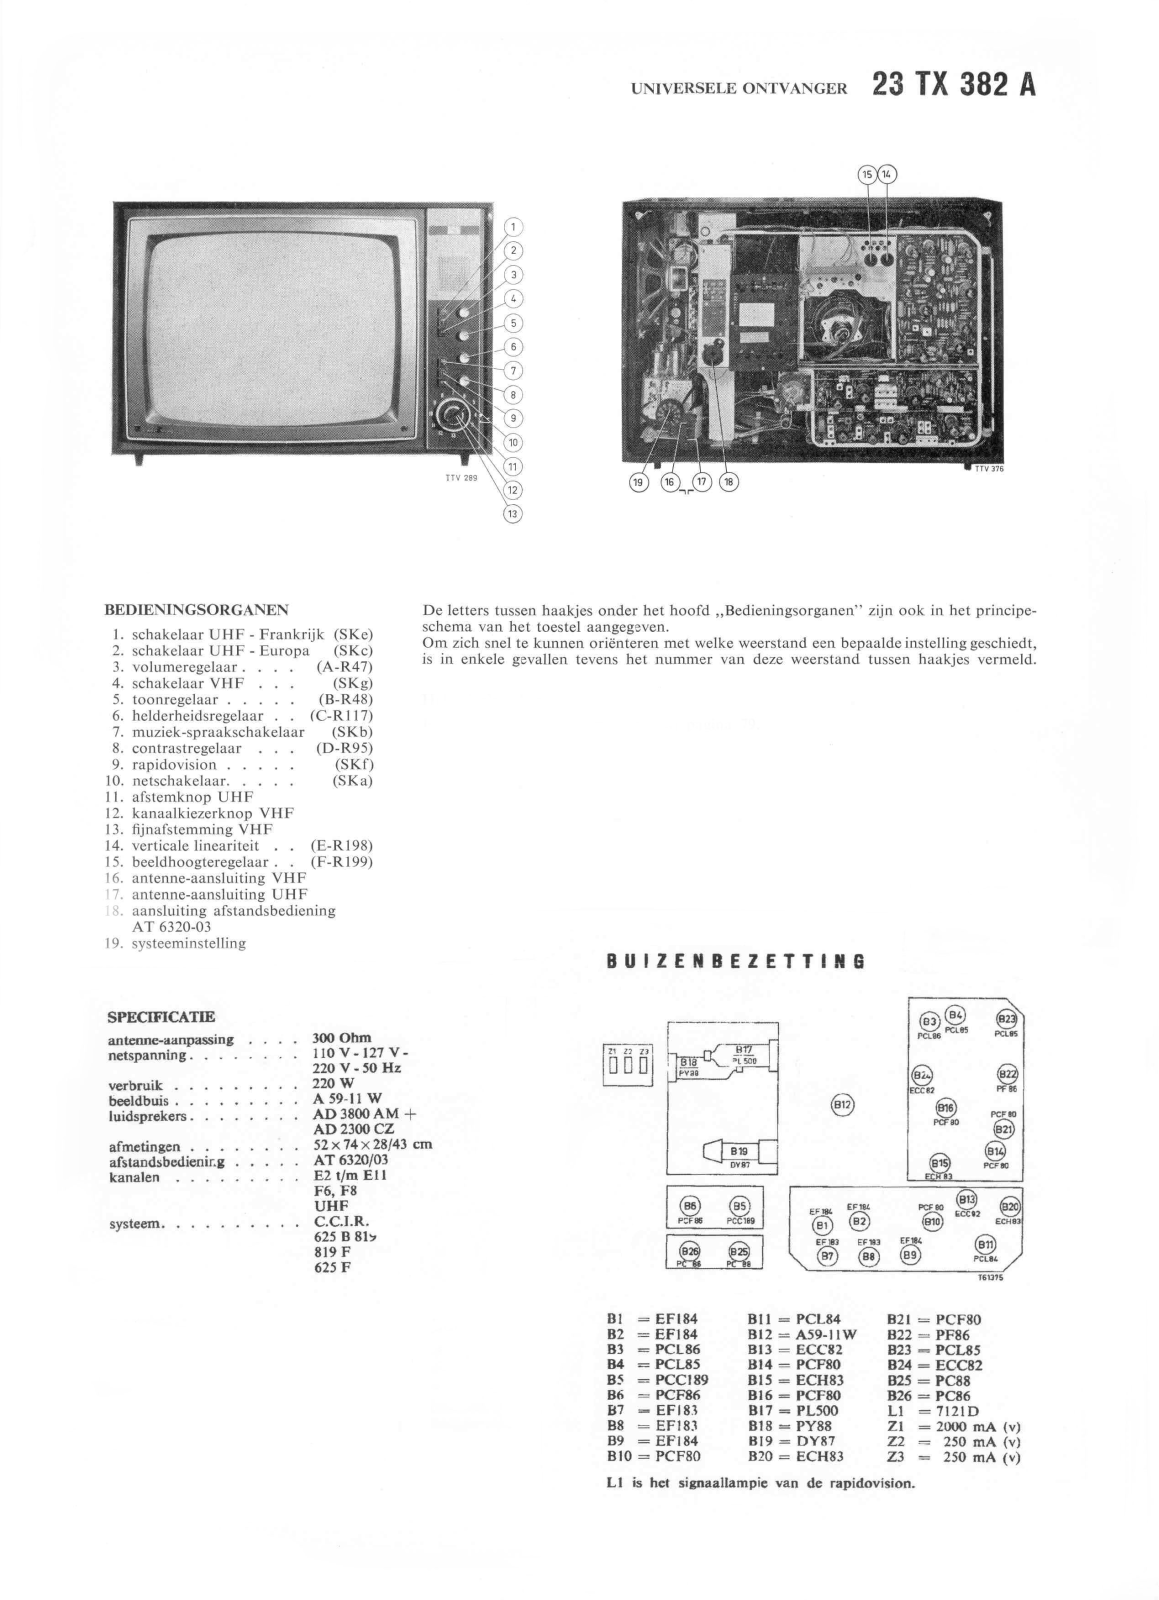 PHILIPS 23tx382a Service Manual